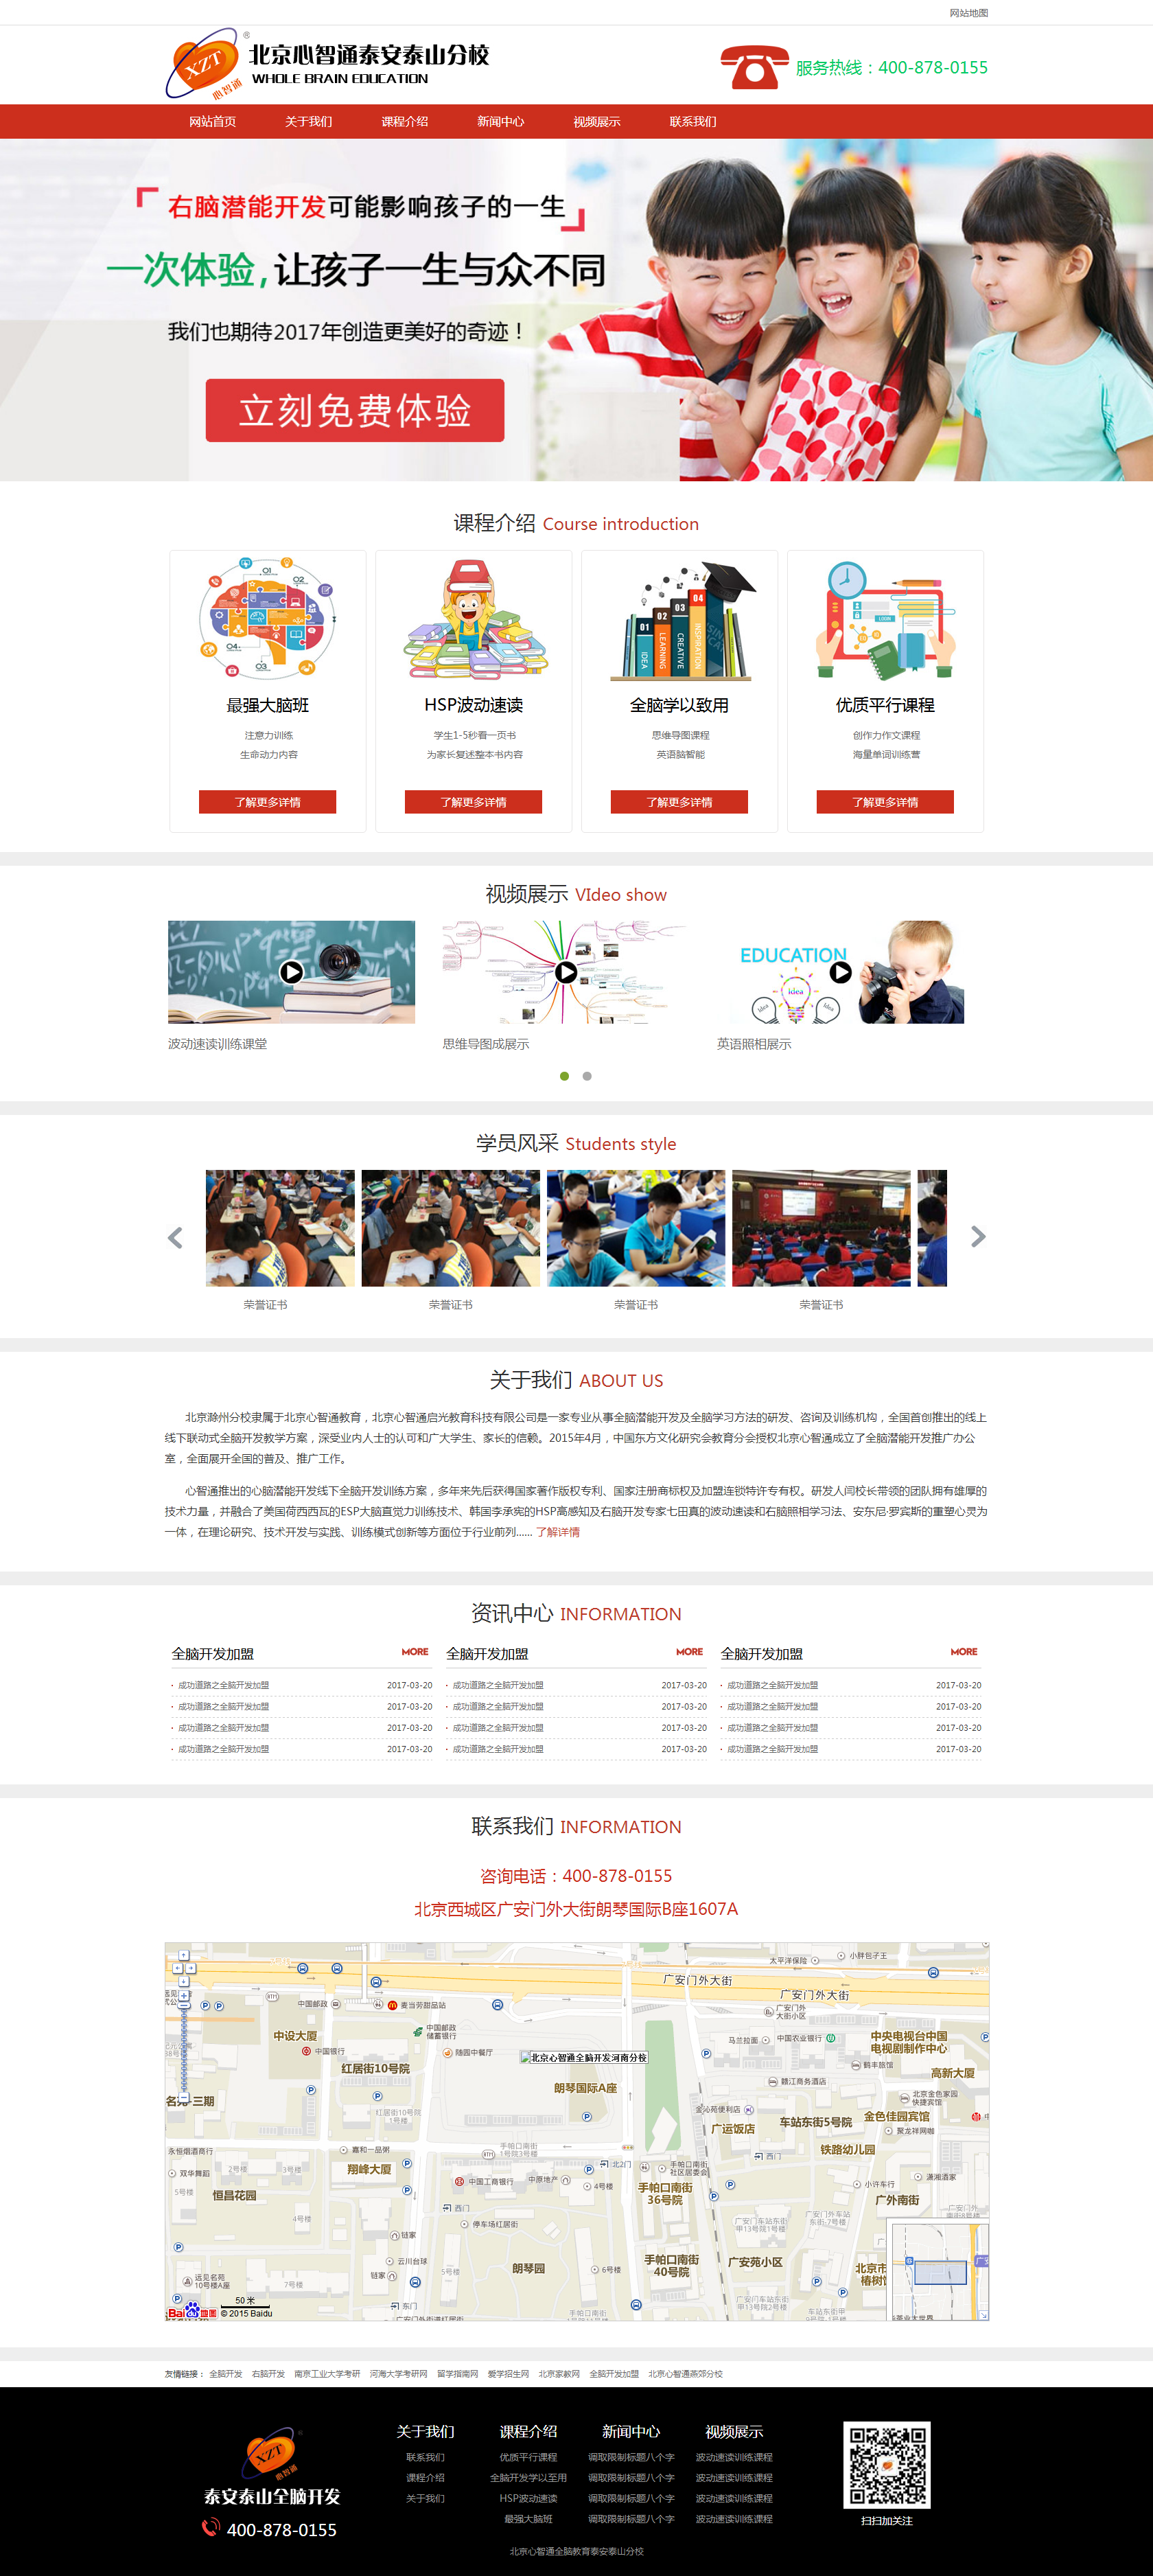  Colorful education website template - New Start Blog